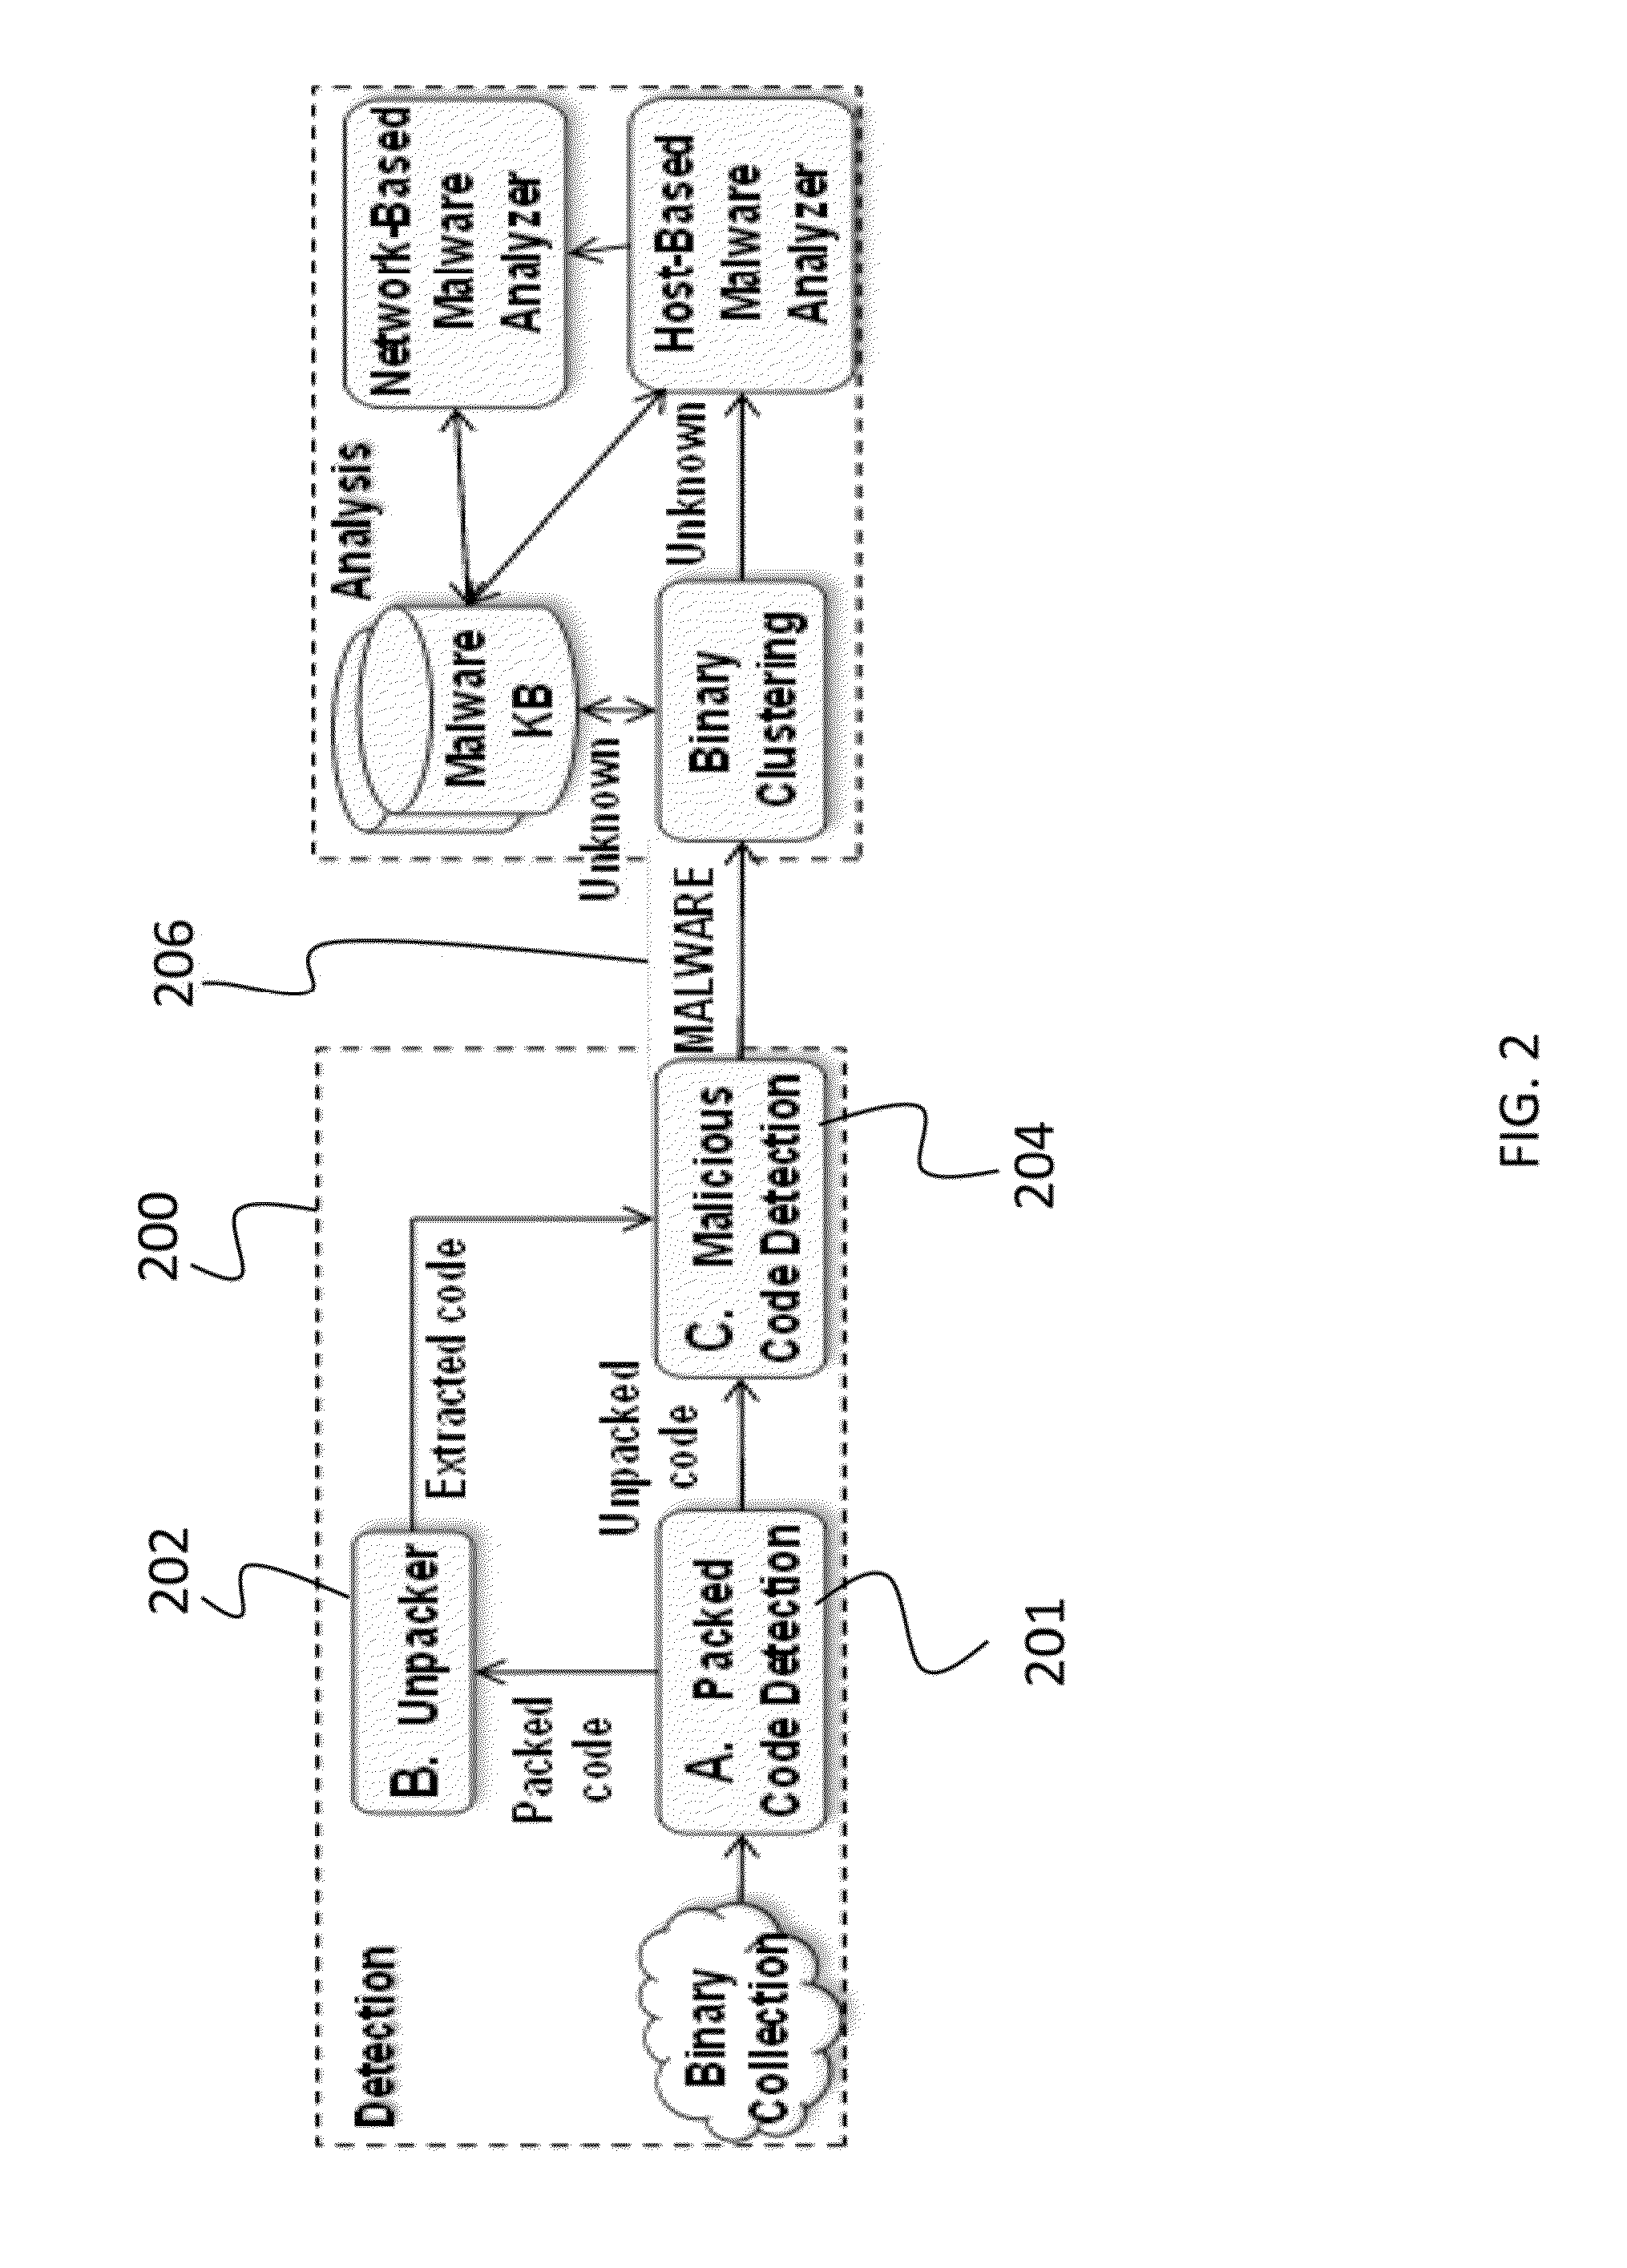 System and methods for digital artifact genetic modeling and forensic analysis